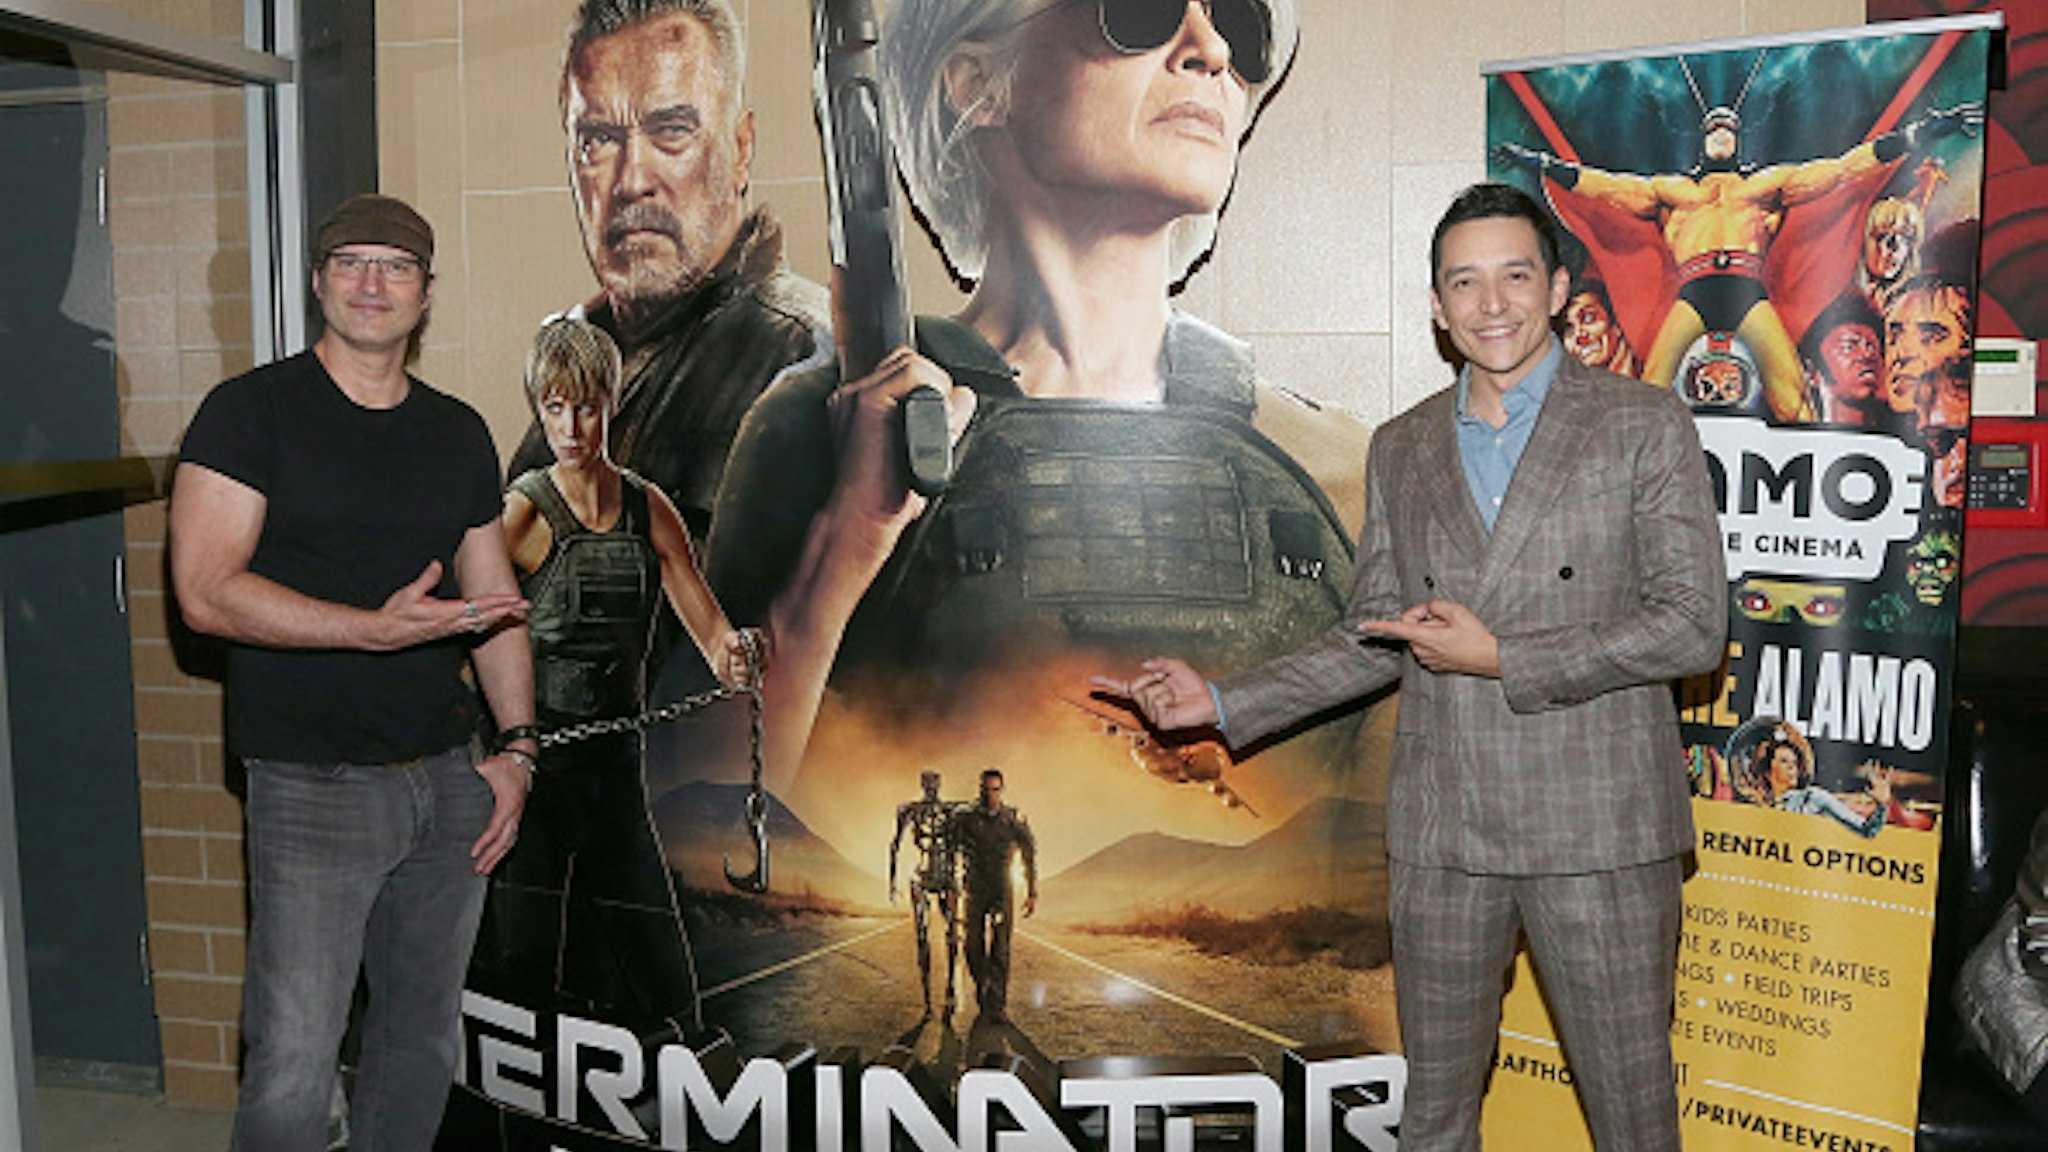 AUSTIN, TEXAS - OCTOBER 29: Gabriel Luna (R) and Robert Rodriguez attend the "Terminator: Dark Fate" Screening at the Alamo Drafthouse Cinema Slaughter Lane on October 29, 2019 in Austin, Texas.